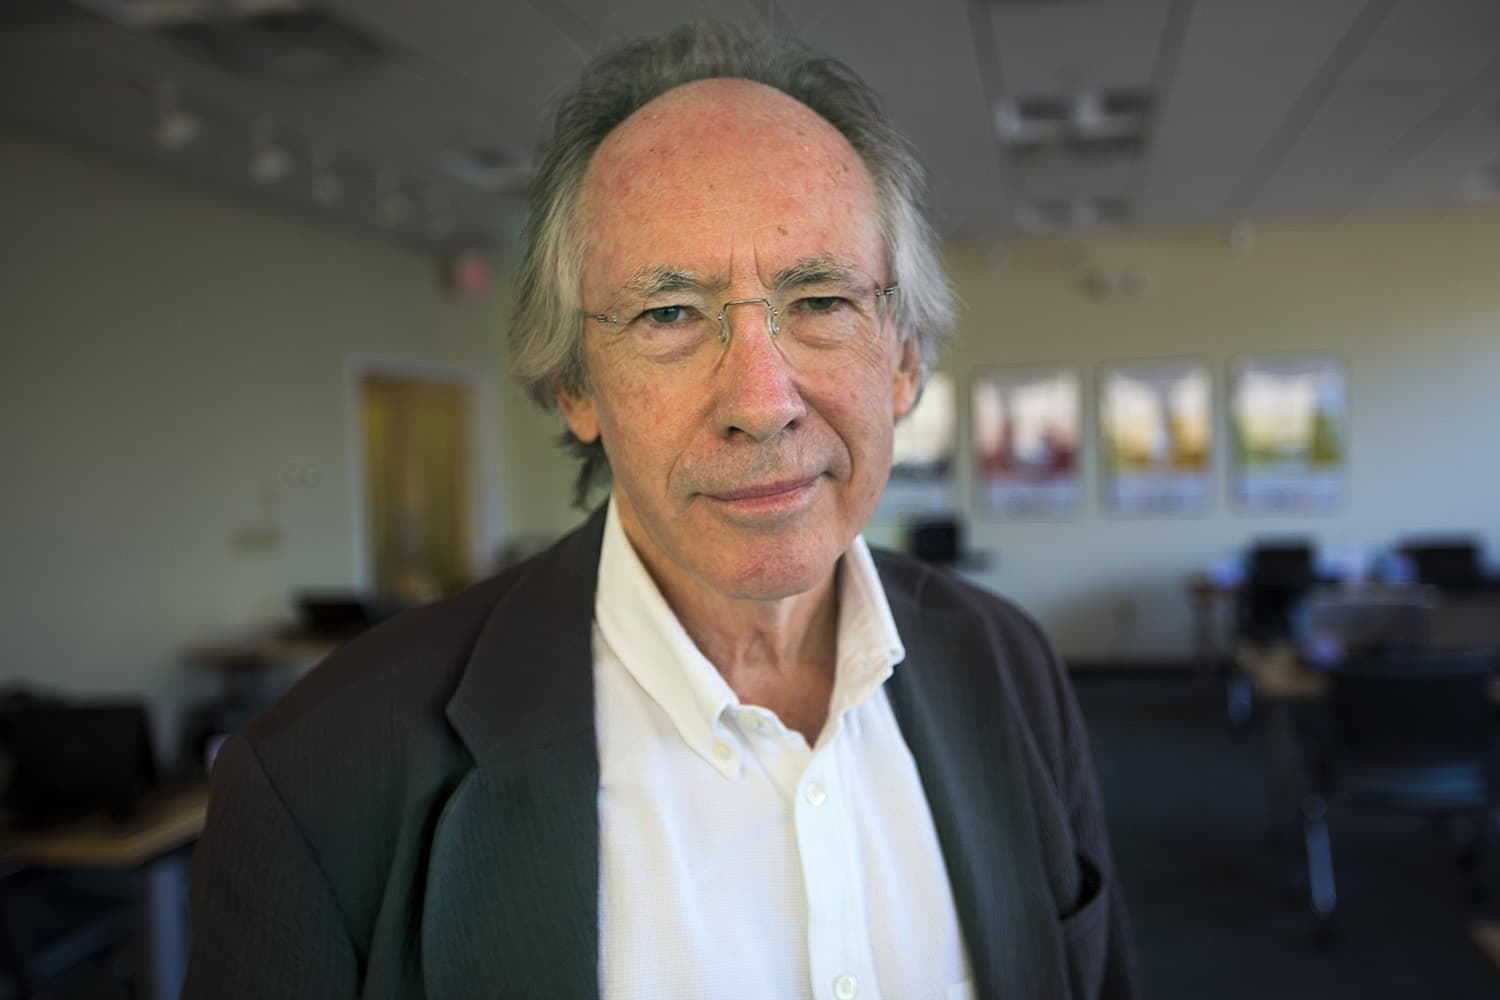 Novelist and author Ian McEwan, pictured in the WBUR offices on Wednesday, September 21, 2016. (Jesse Costa/WBUR)